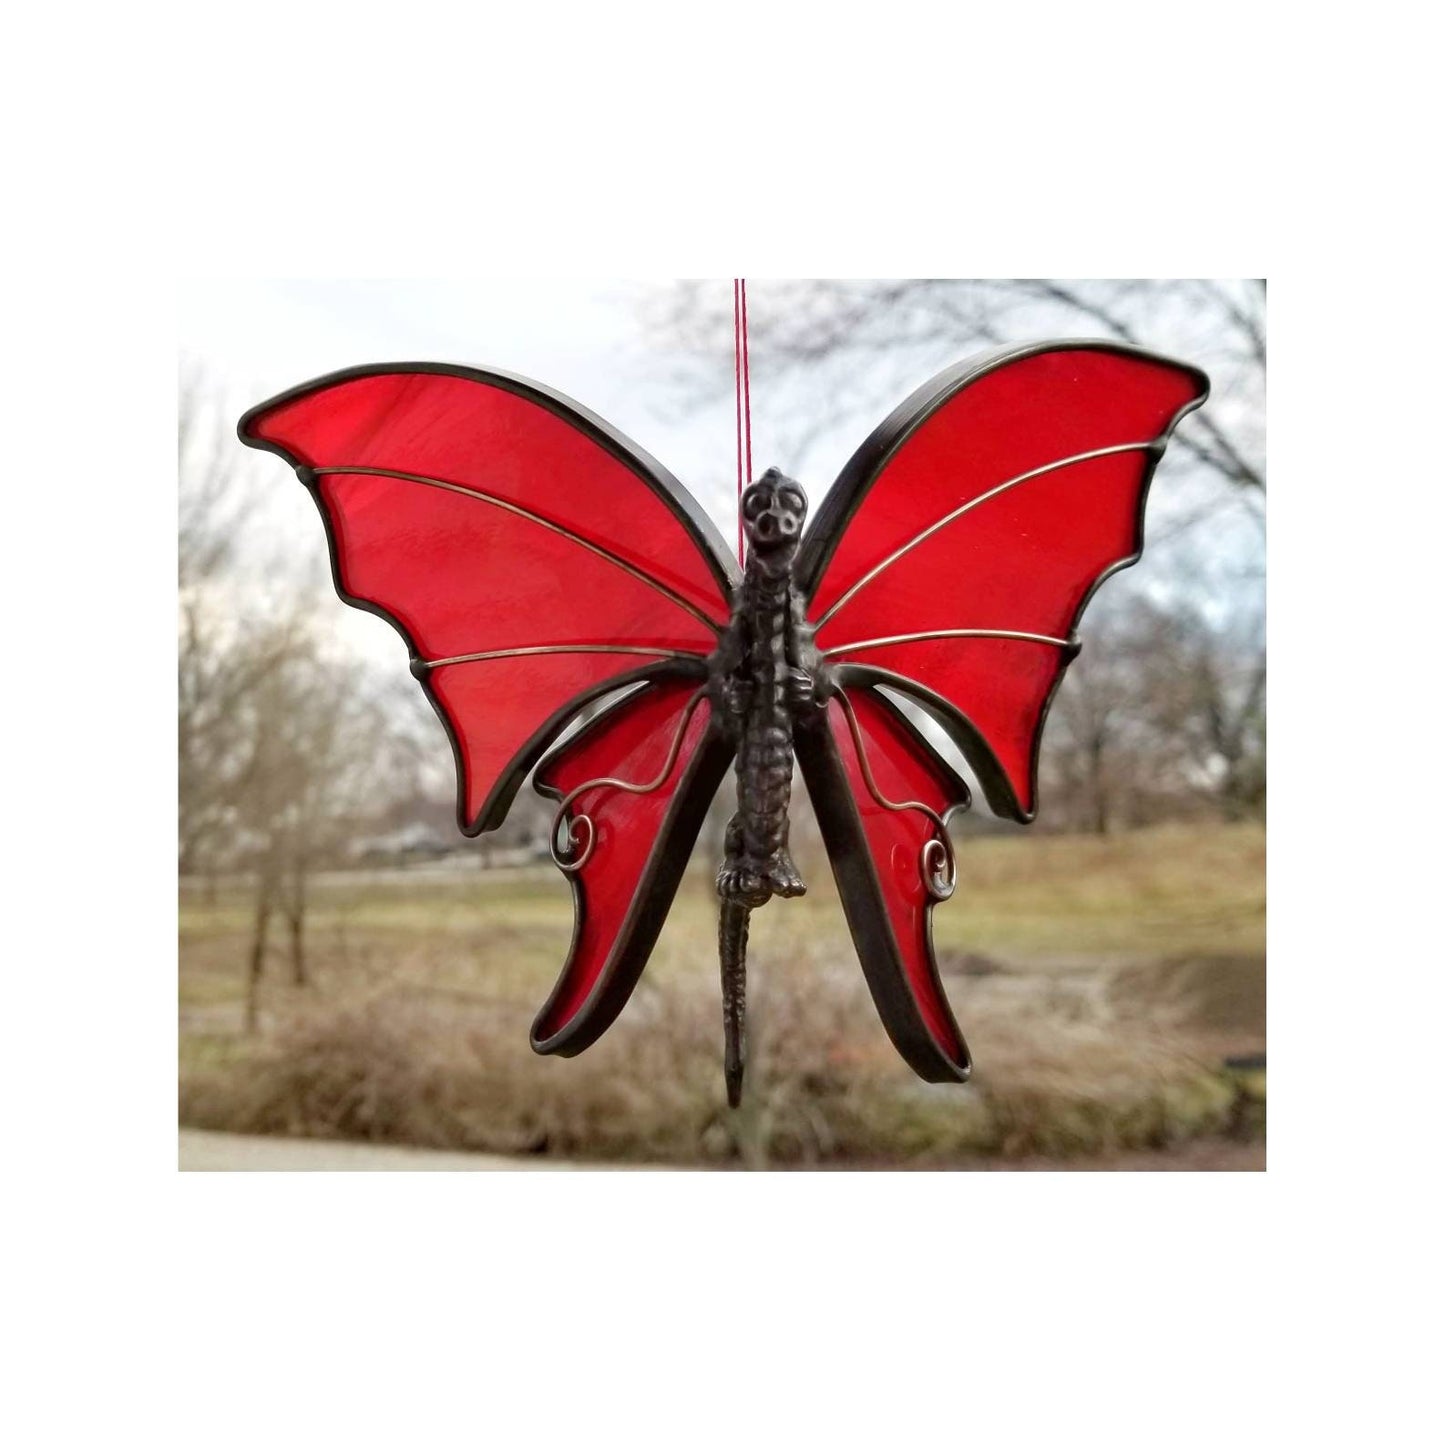 Dragon, Hanging Stained Glass Suncatcher. 3 dimensional figurine sculpture with black metal finish. Bright Red glass & copper wire accents.